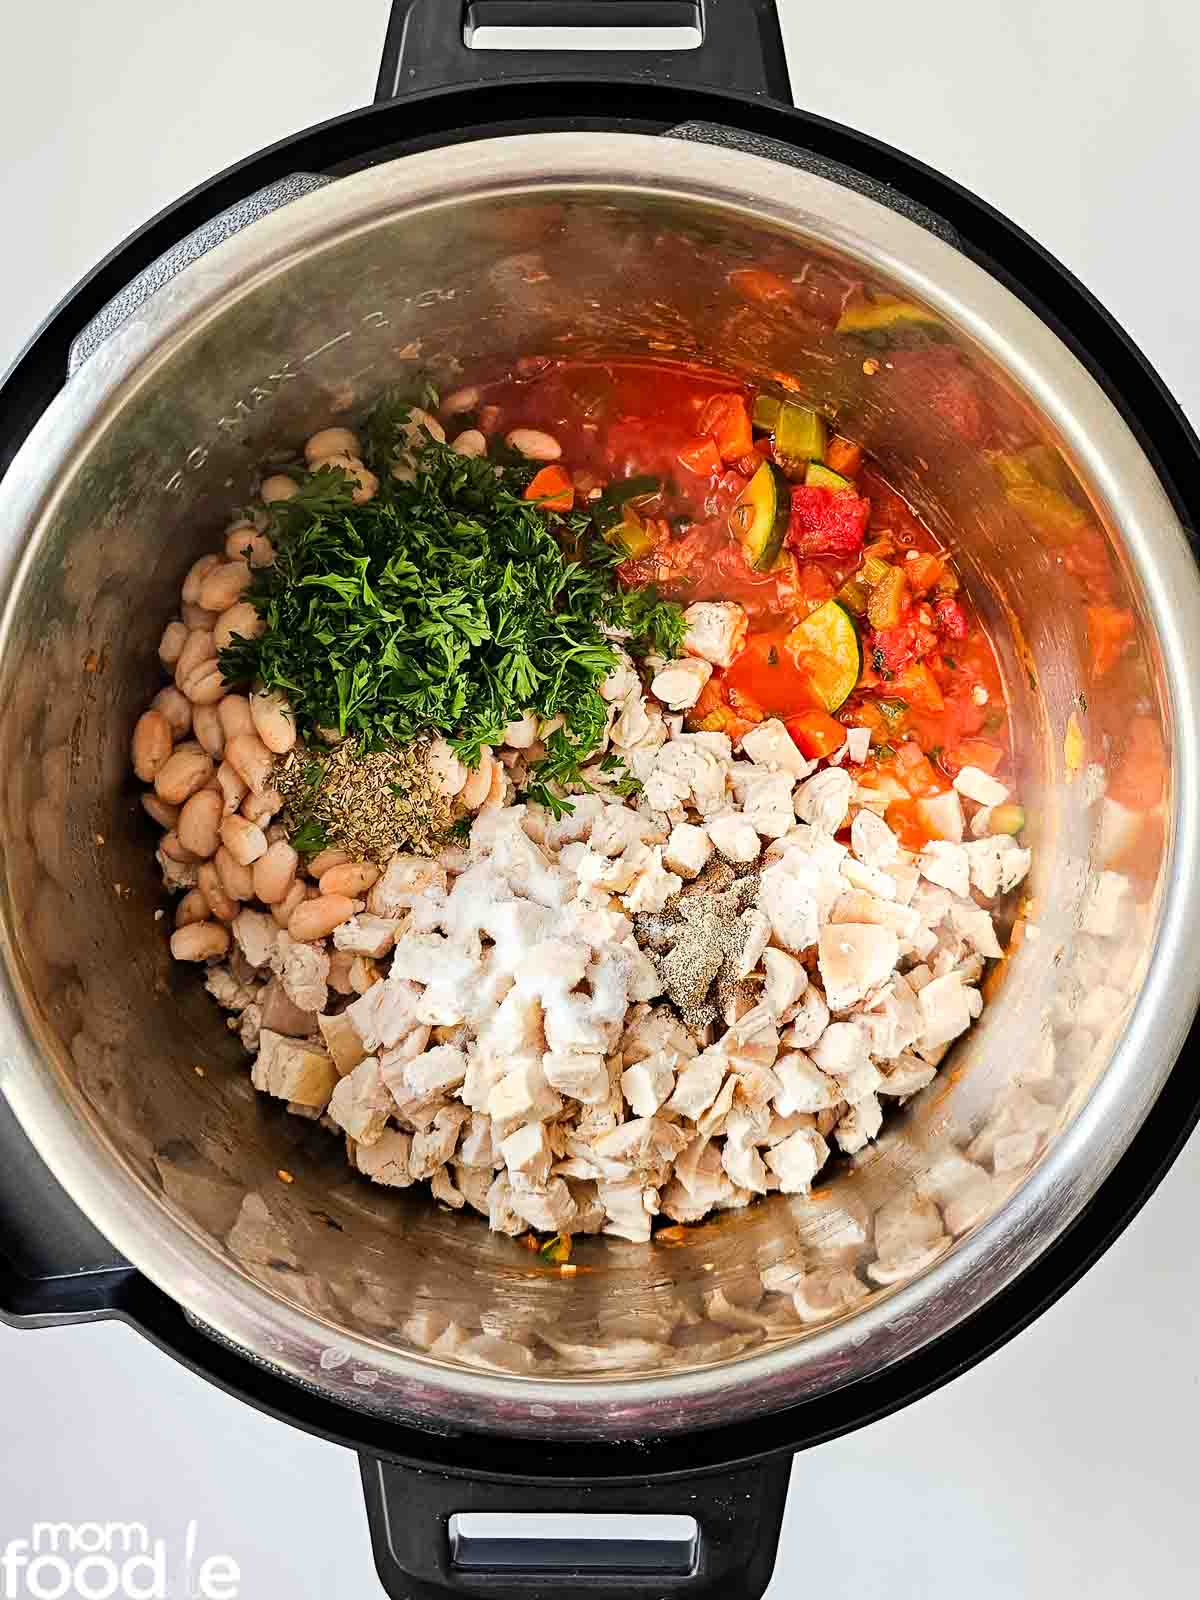 Added rest of ingredients to instant pot